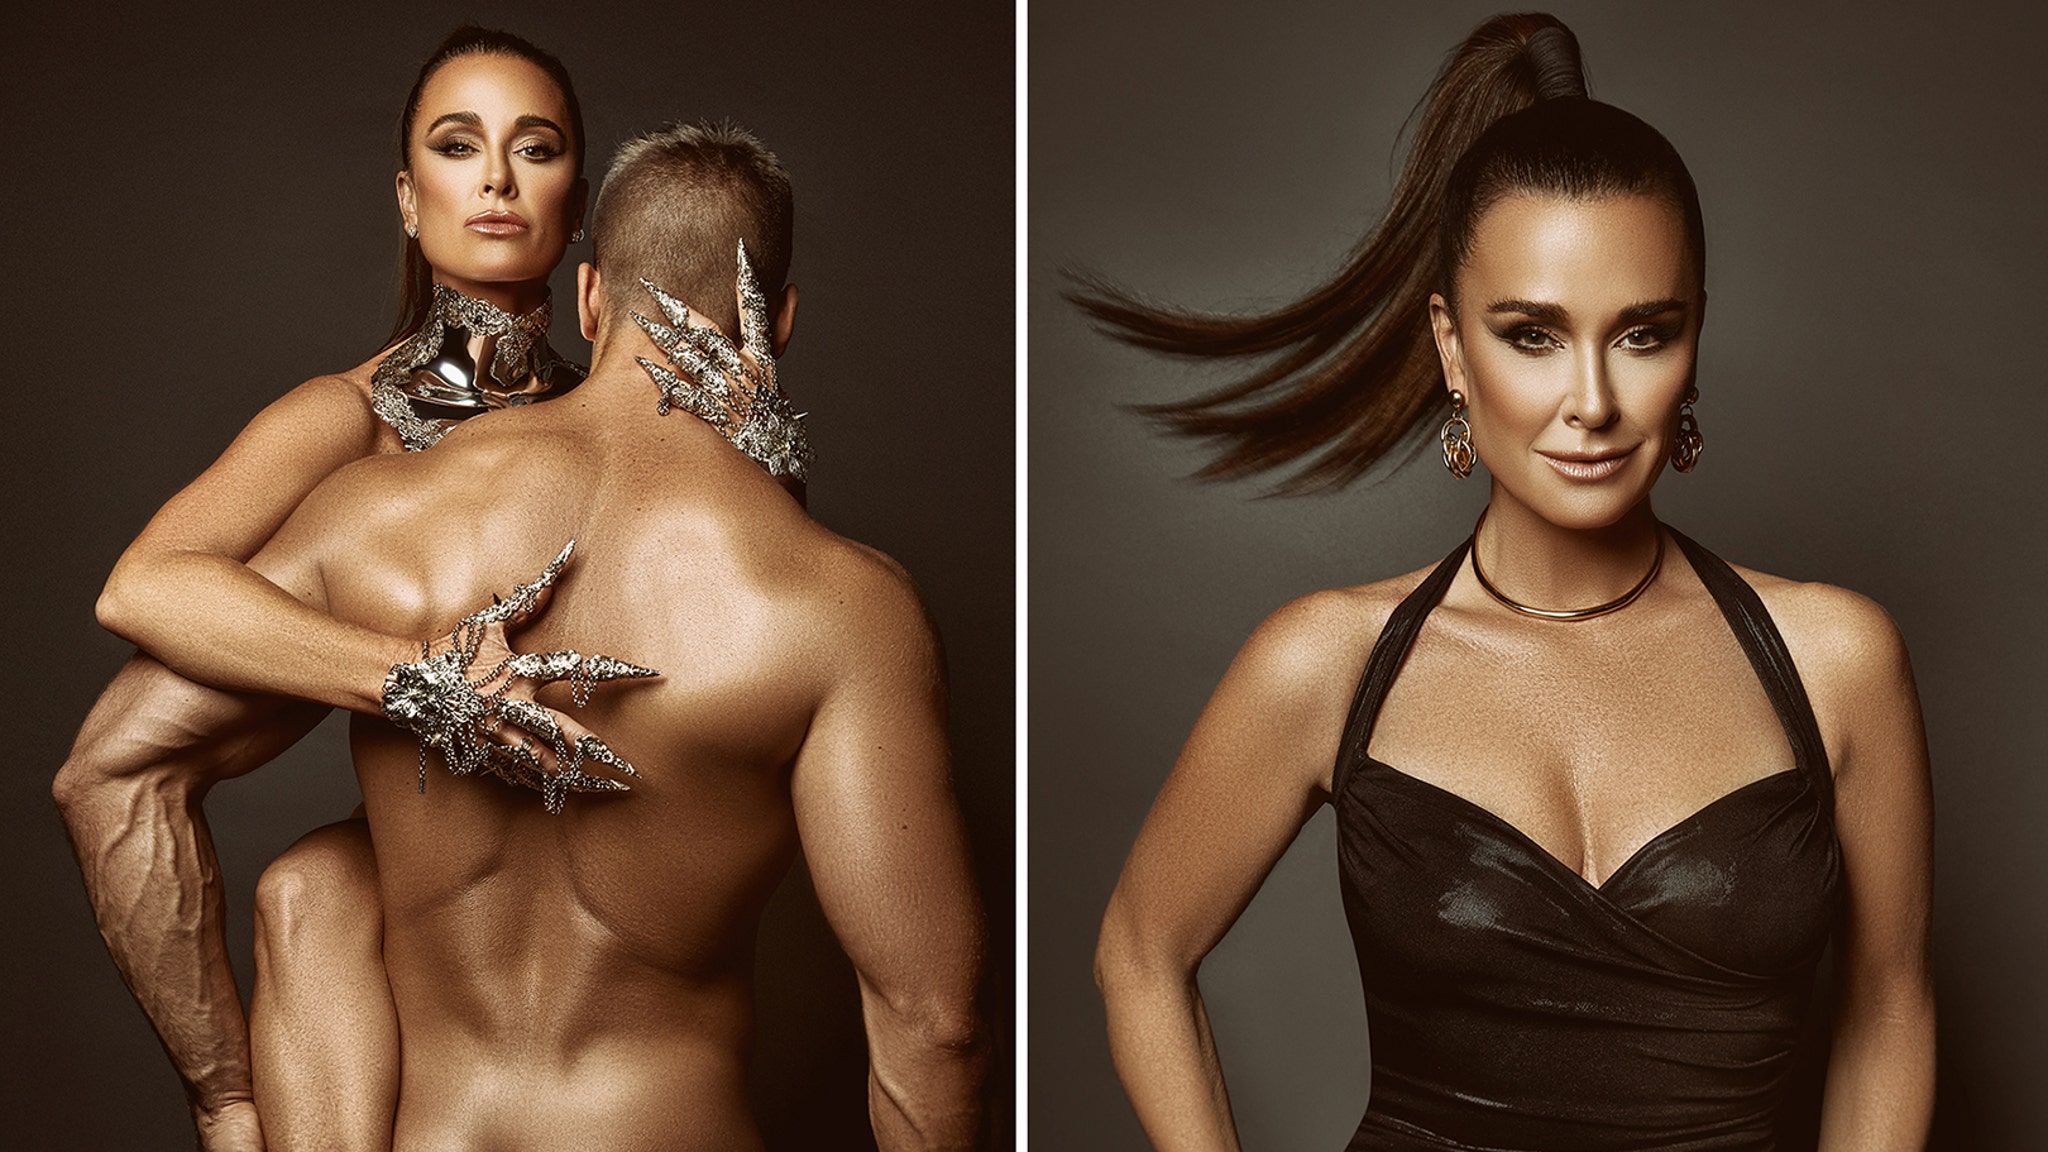 Kyle Richards Straddles Nude Male Model In New Photoshoot pic